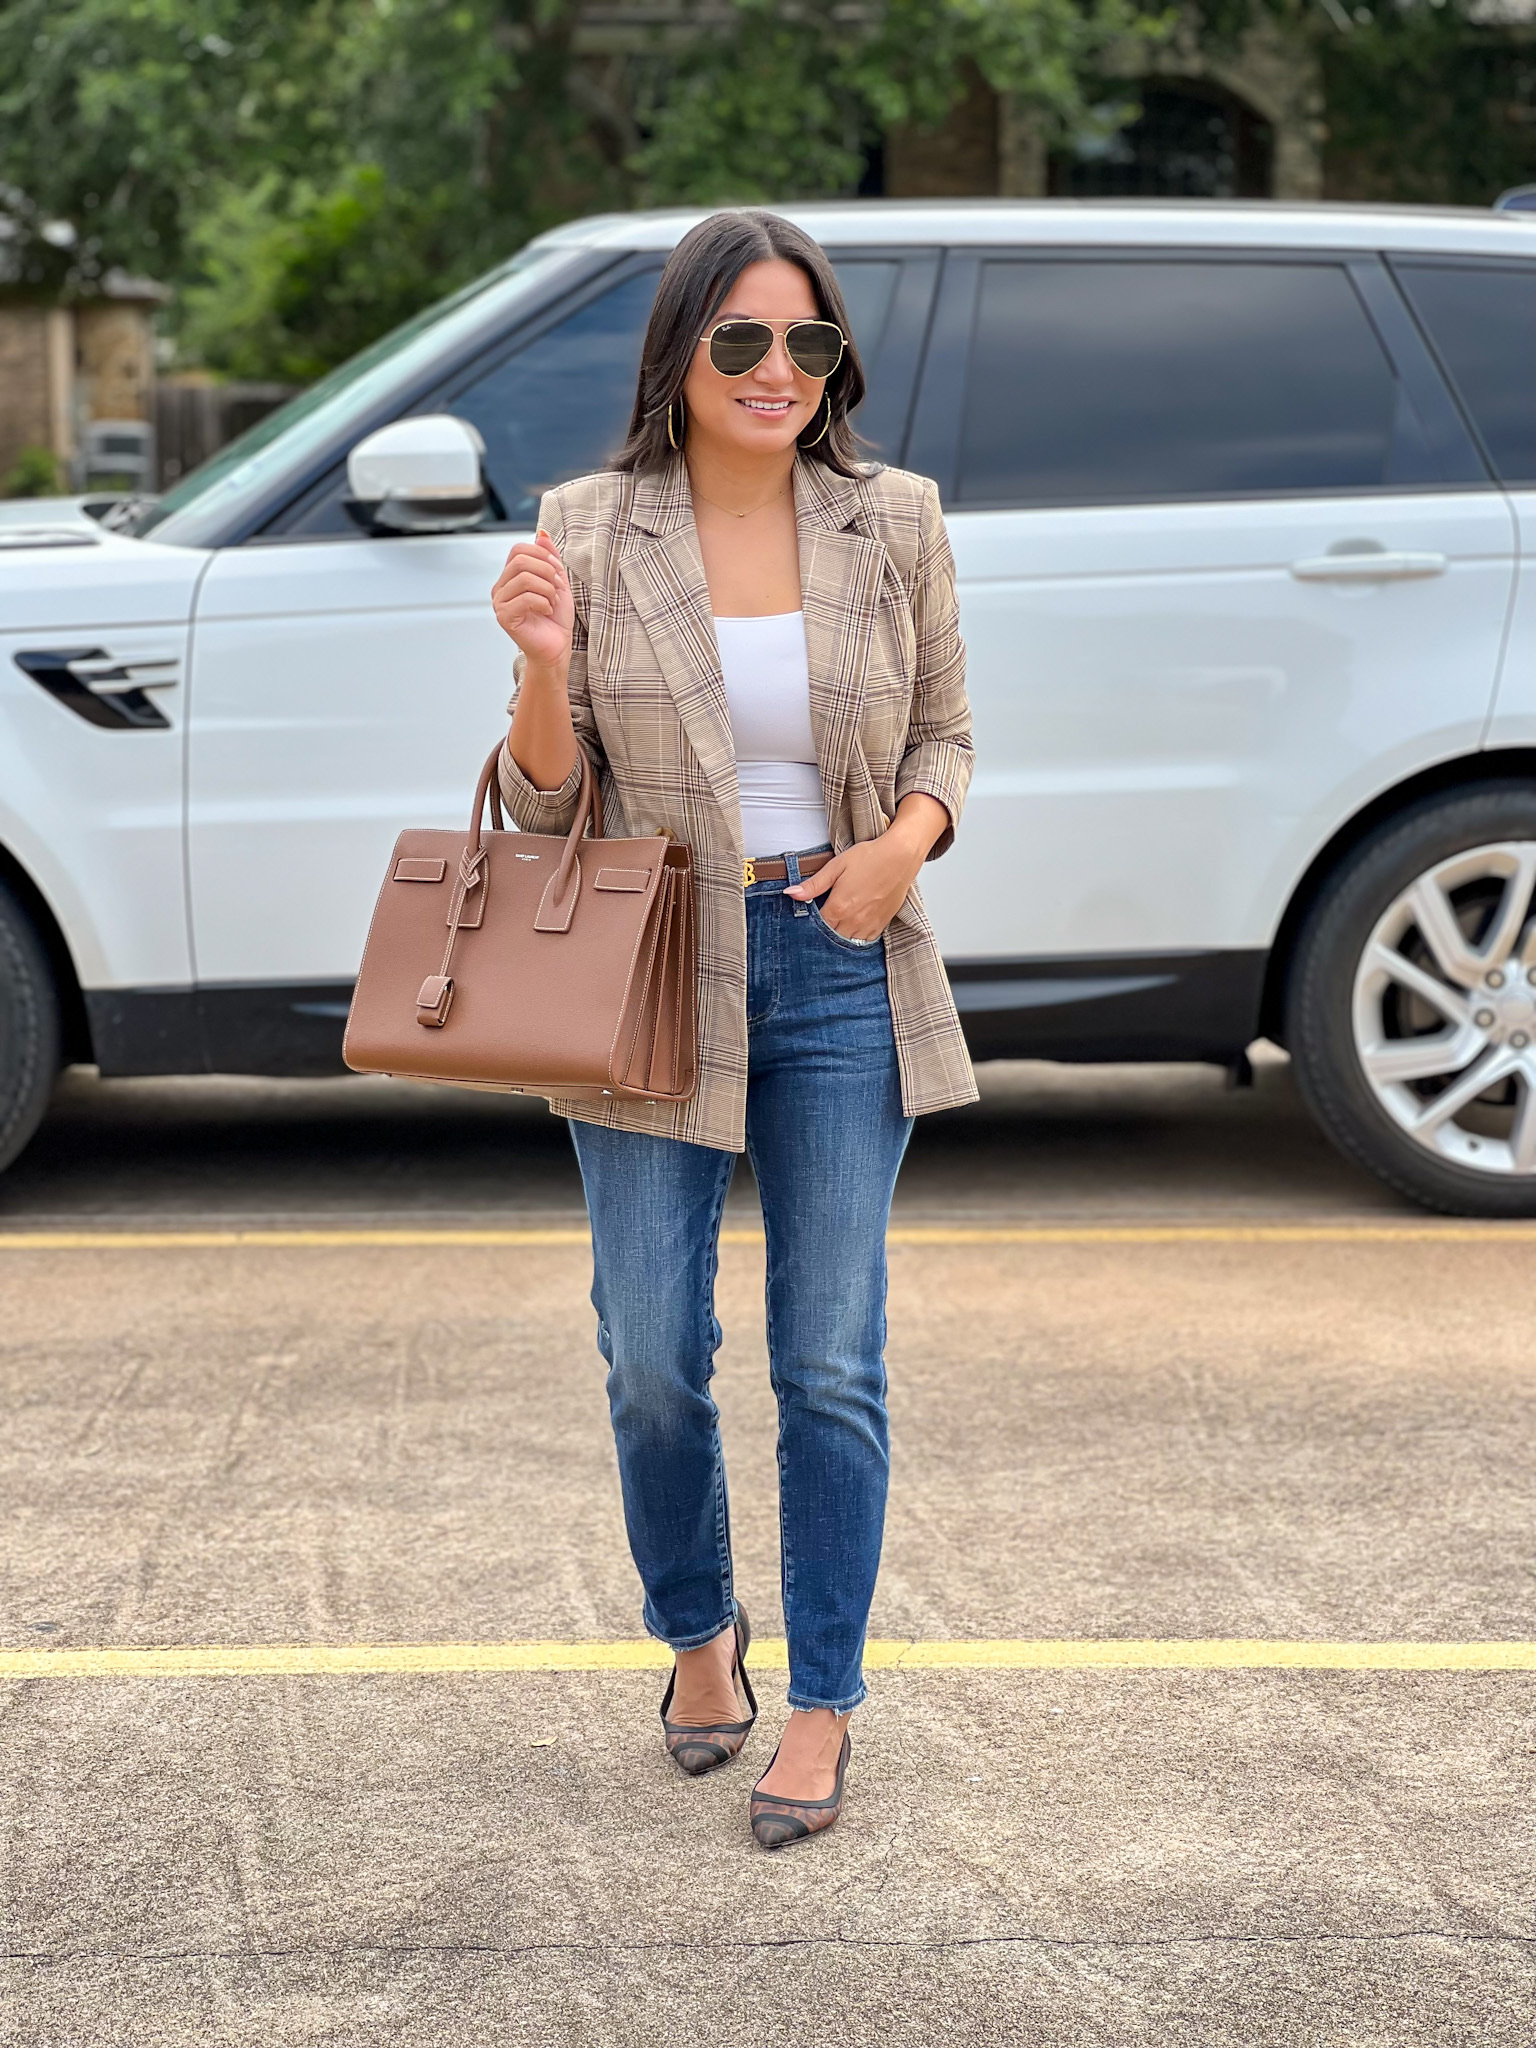 I love a good blazer and pair of jeans! It's so fun making a blazer a little bit more casual.